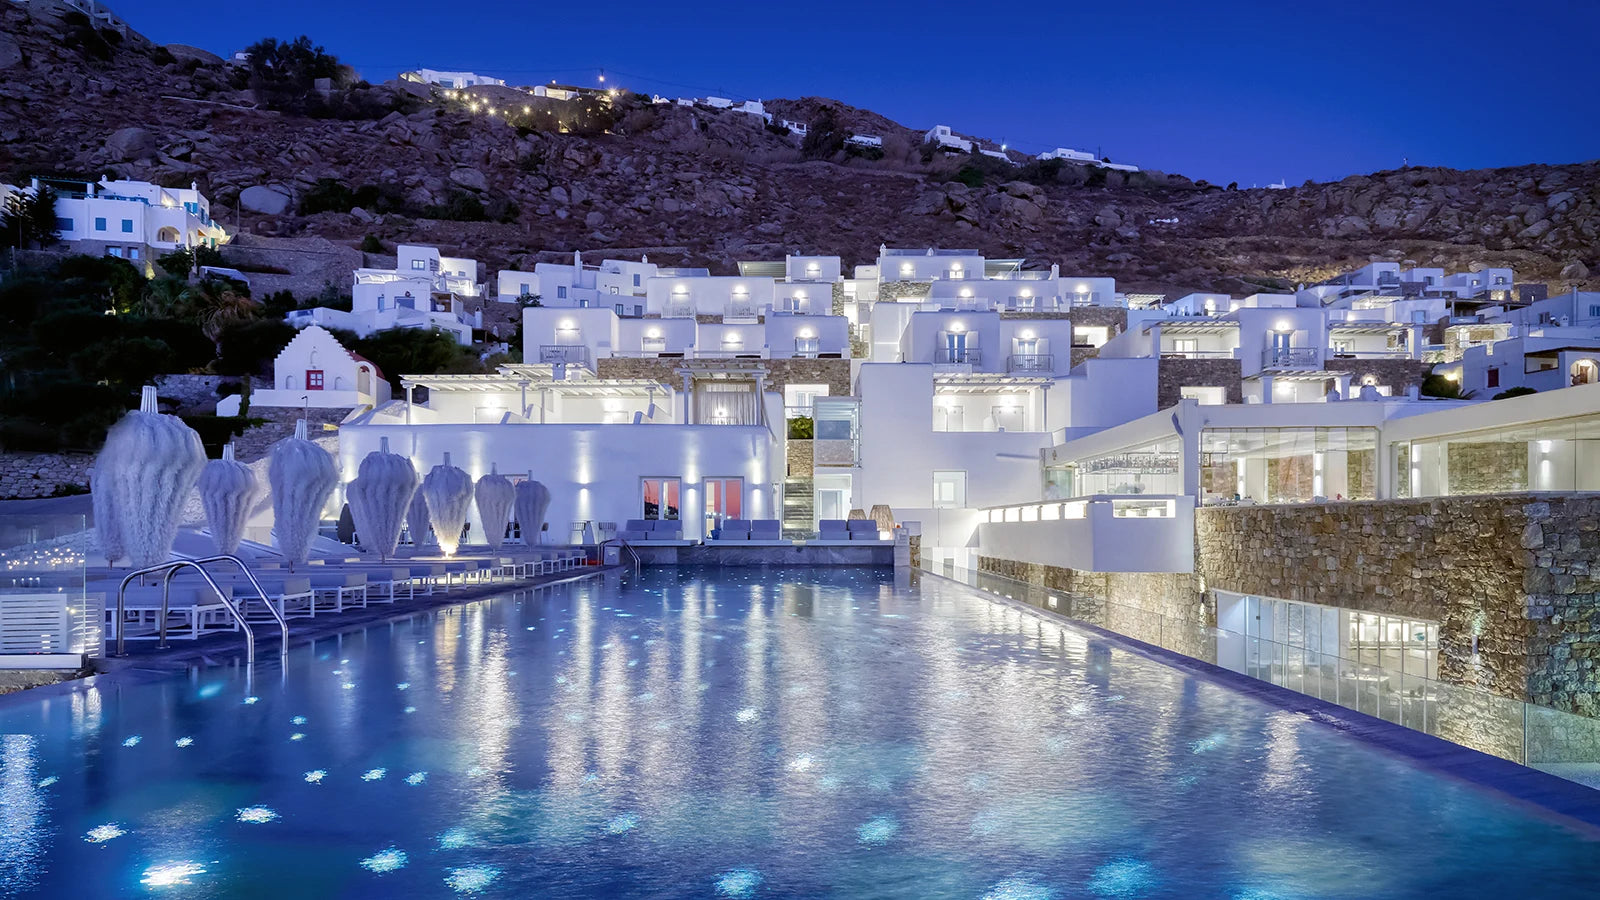 yachts for rent in mykonos